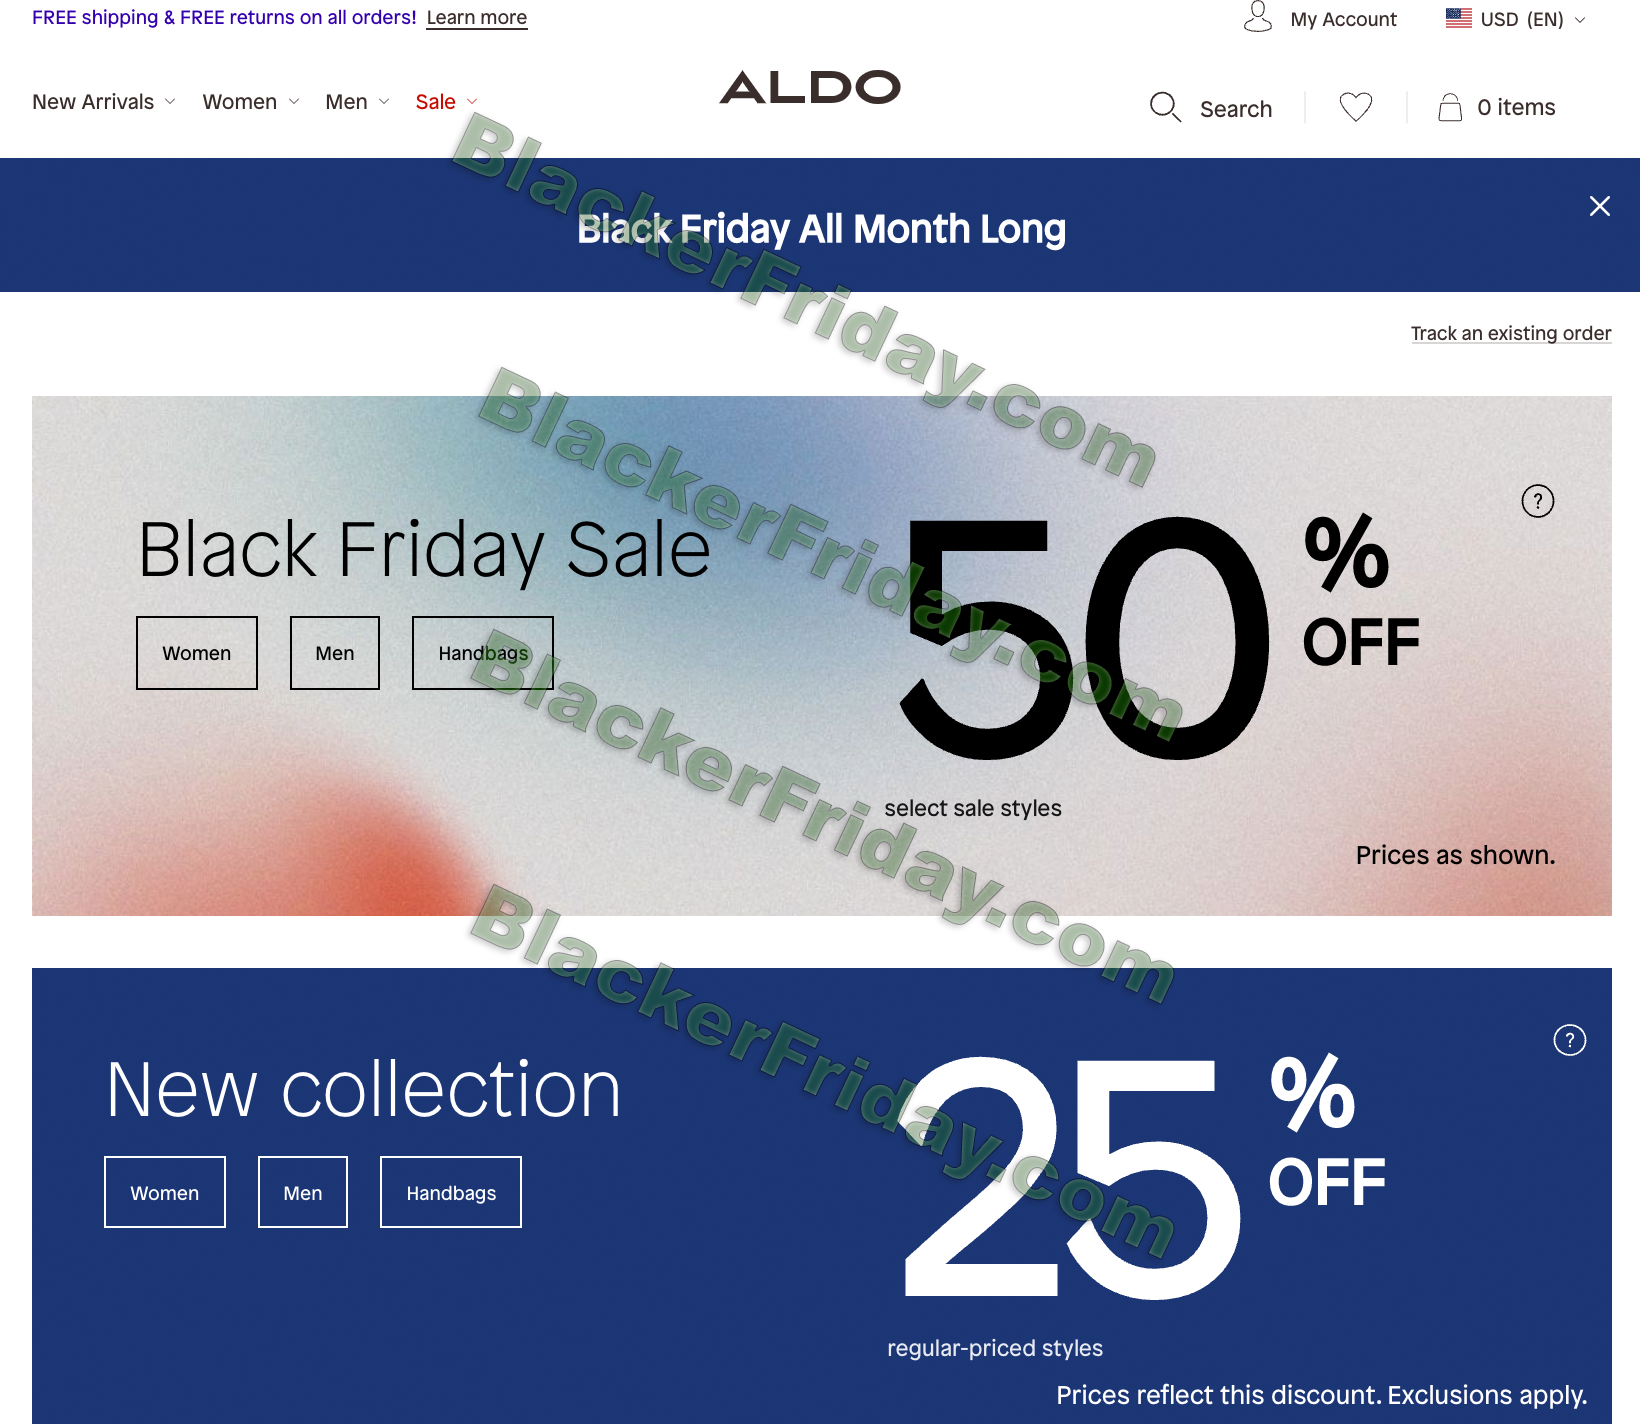 What to expect at ALDO's Black Friday 2023 Sale - Blacker Friday